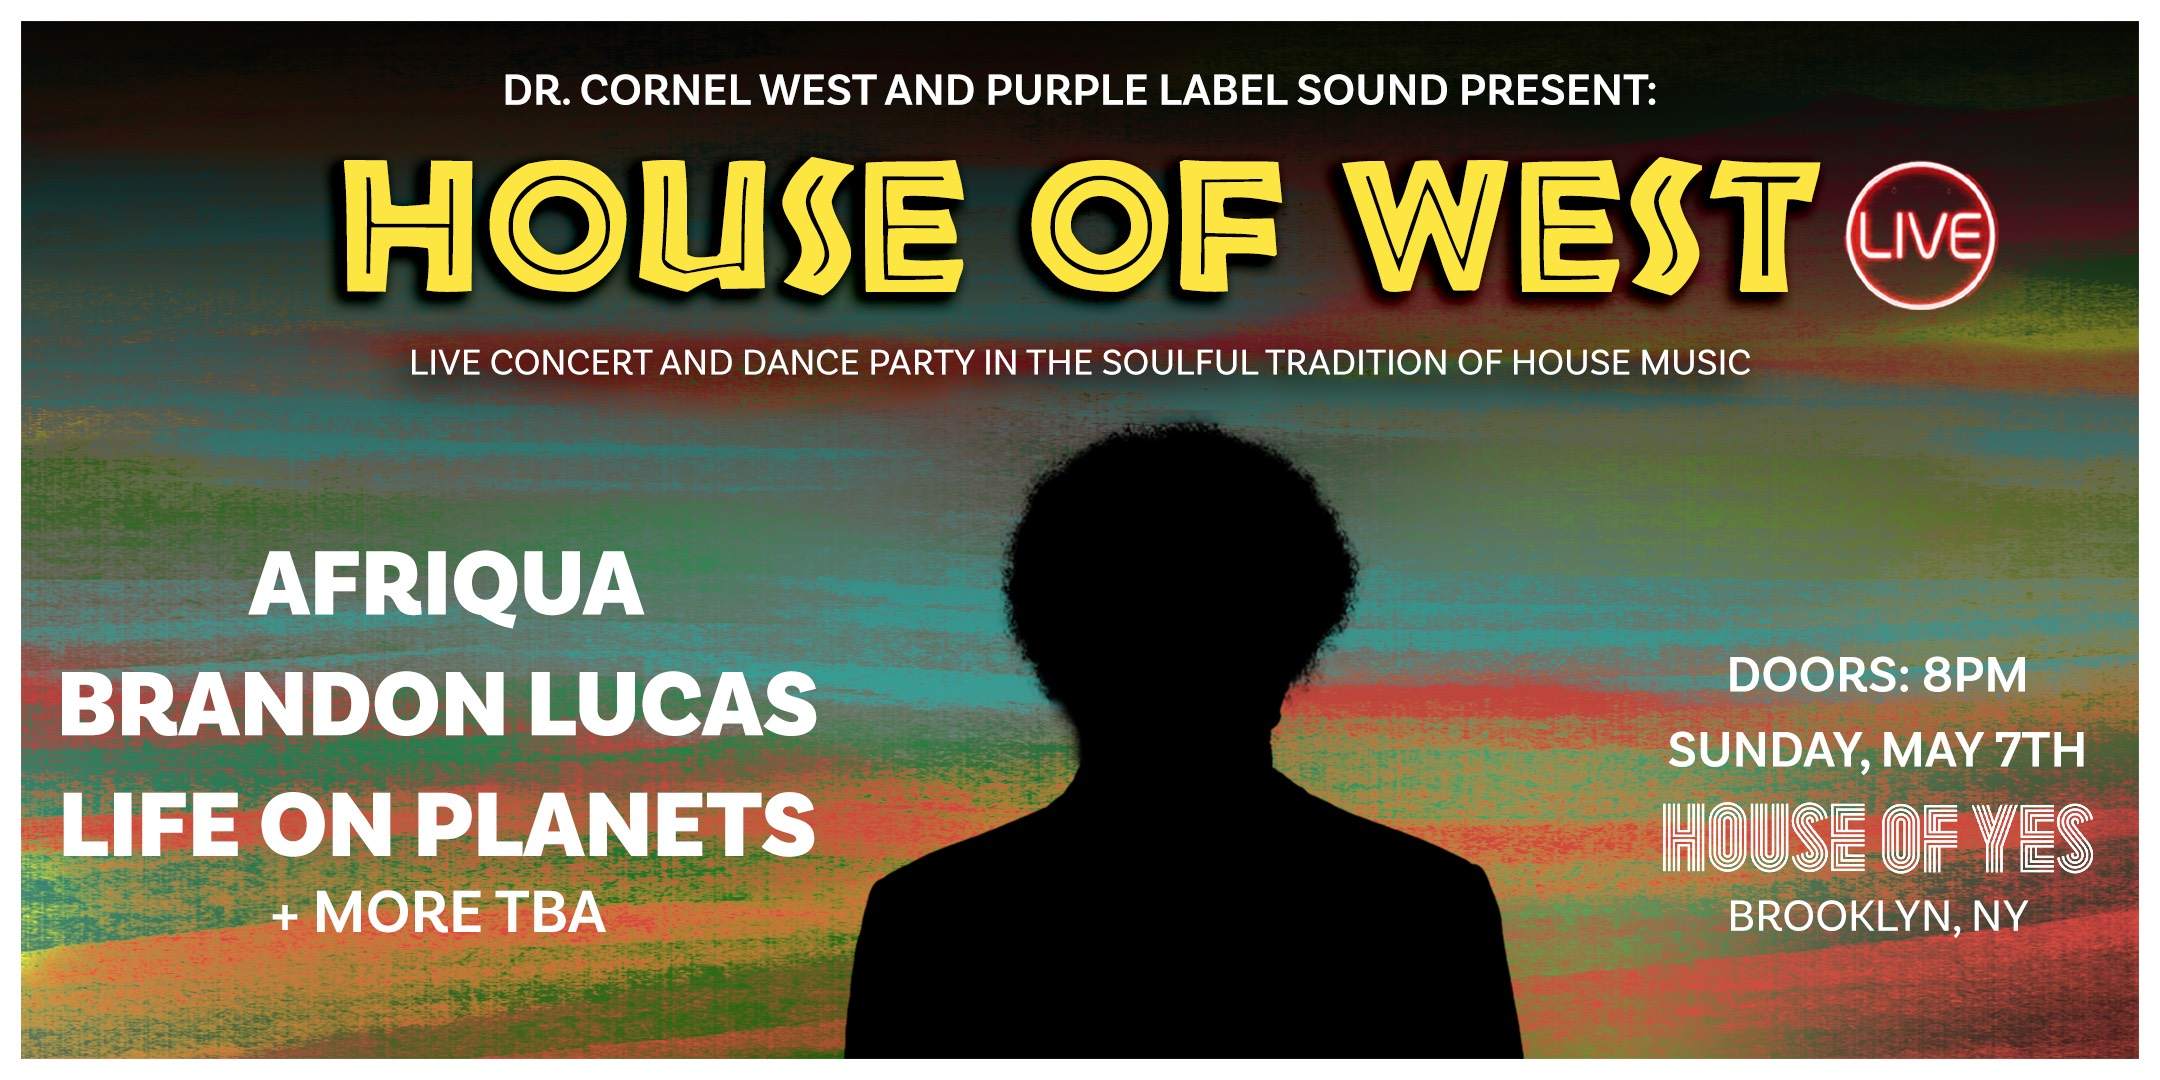 House of West: Afriqua, Brandon Lucas, Life on Planets - フライヤー表